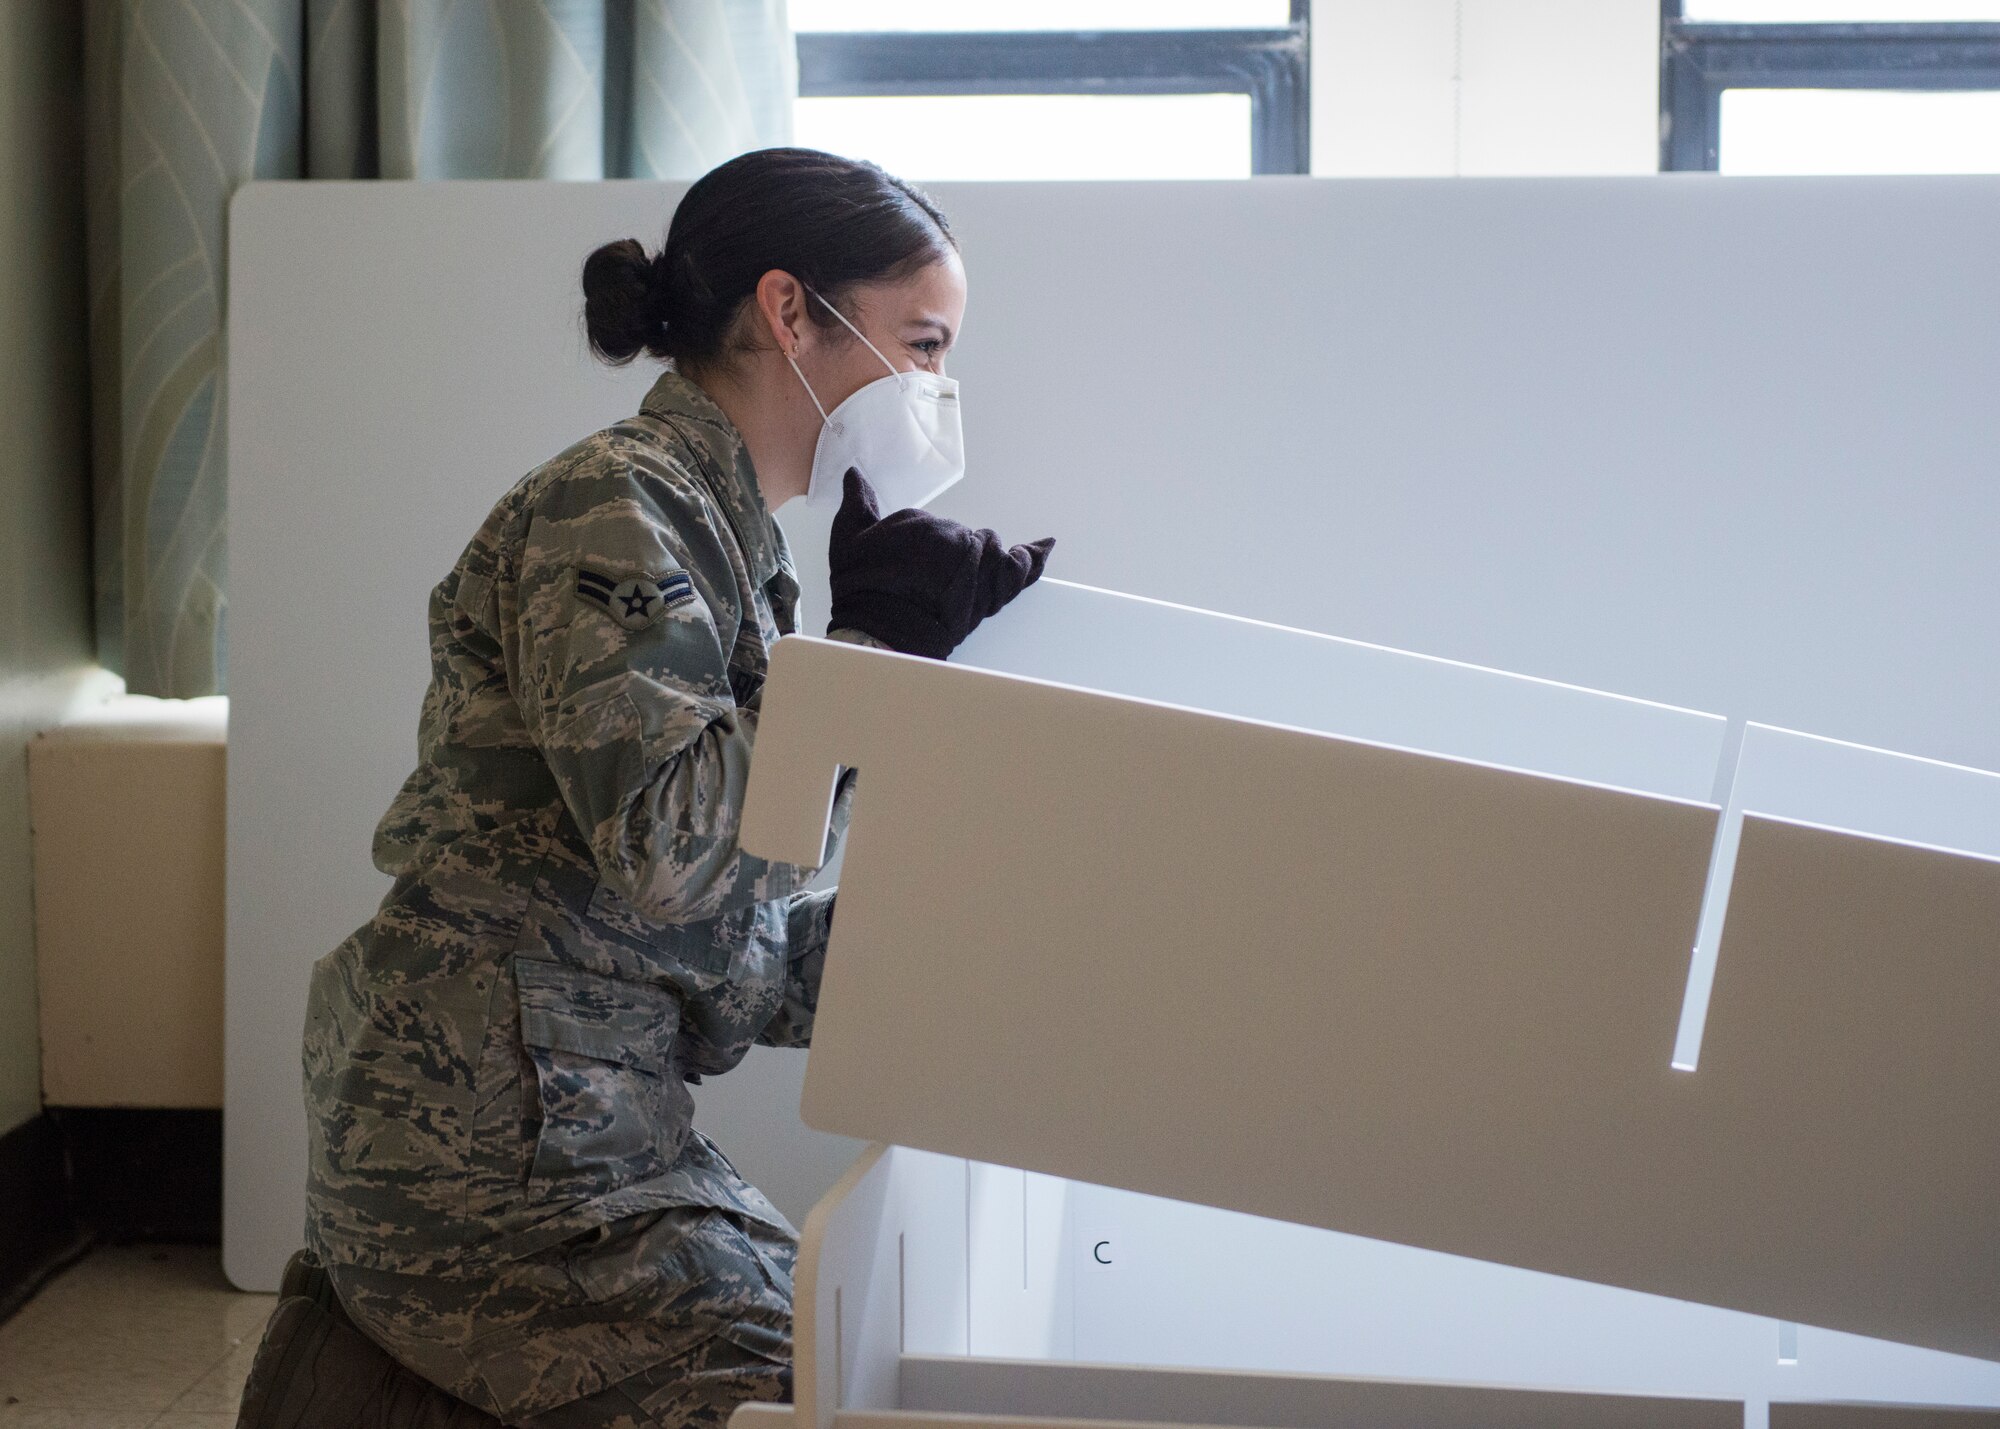 Airman 1st Class Arielle Robles, 103rd Maintenance Group administration specialist, helps construct a bed frame at Stamford Hospital in Stamford, Connecticut, April 8, 2020. Connecticut National Guard Soldiers and Airmen set up 200 beds at the hospital to build capacity and constructed Alaskan Small Shelter System tents for a separate triage area in response to the COVID-19 pandemic. (U.S. Air National Guard photo by Staff Sgt. Steven Tucker)